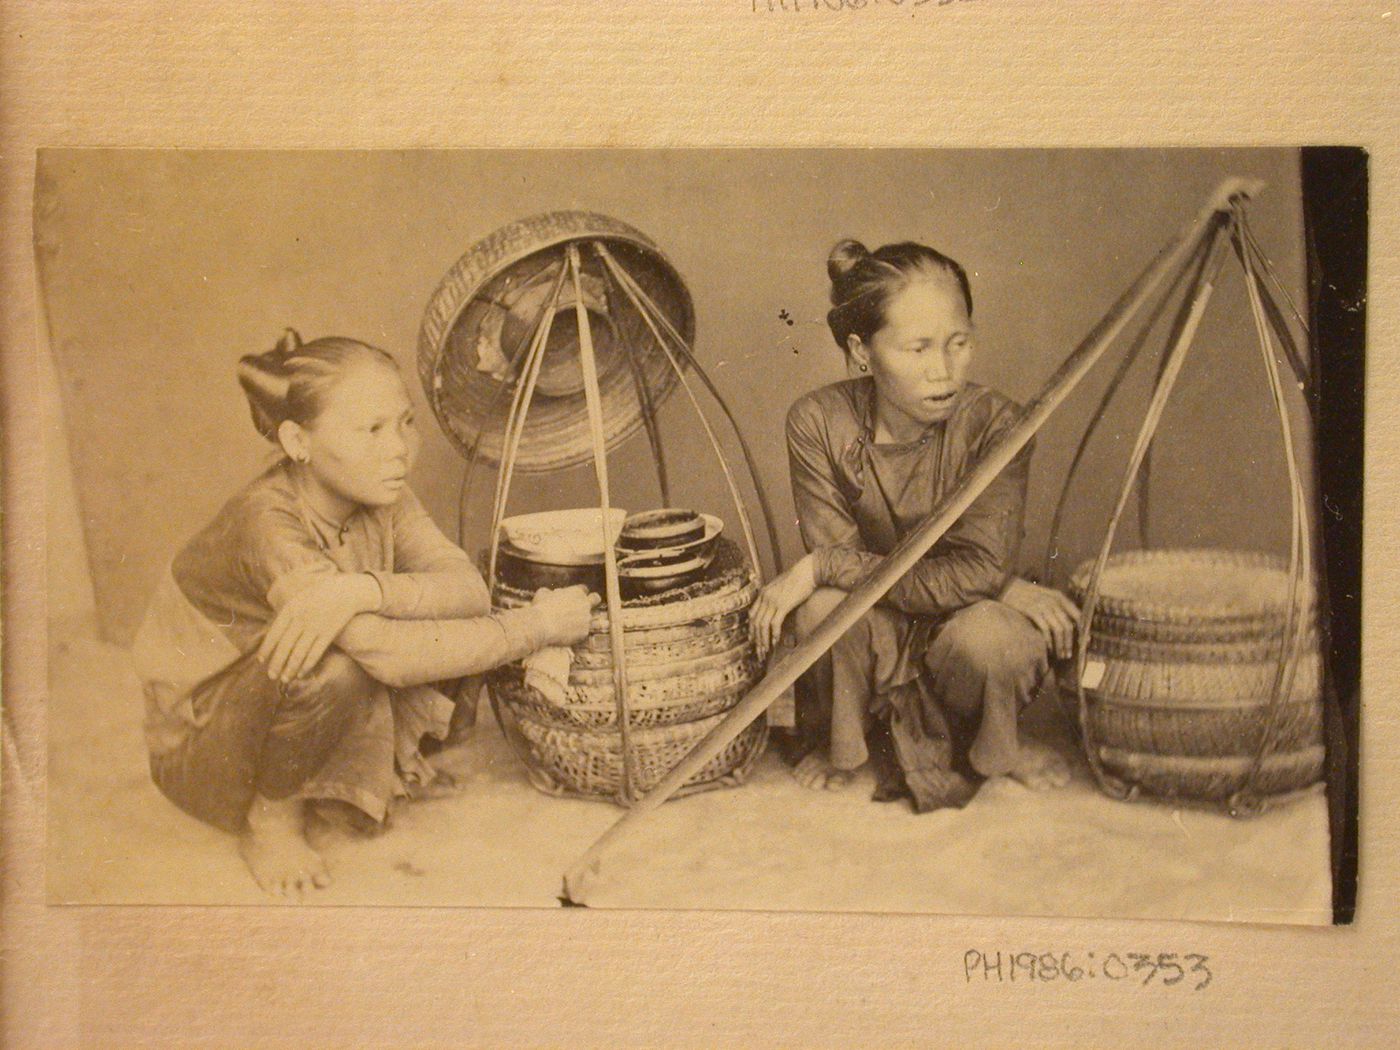 Group portrait of two women, probably in Cochin China (now in Vietnam)